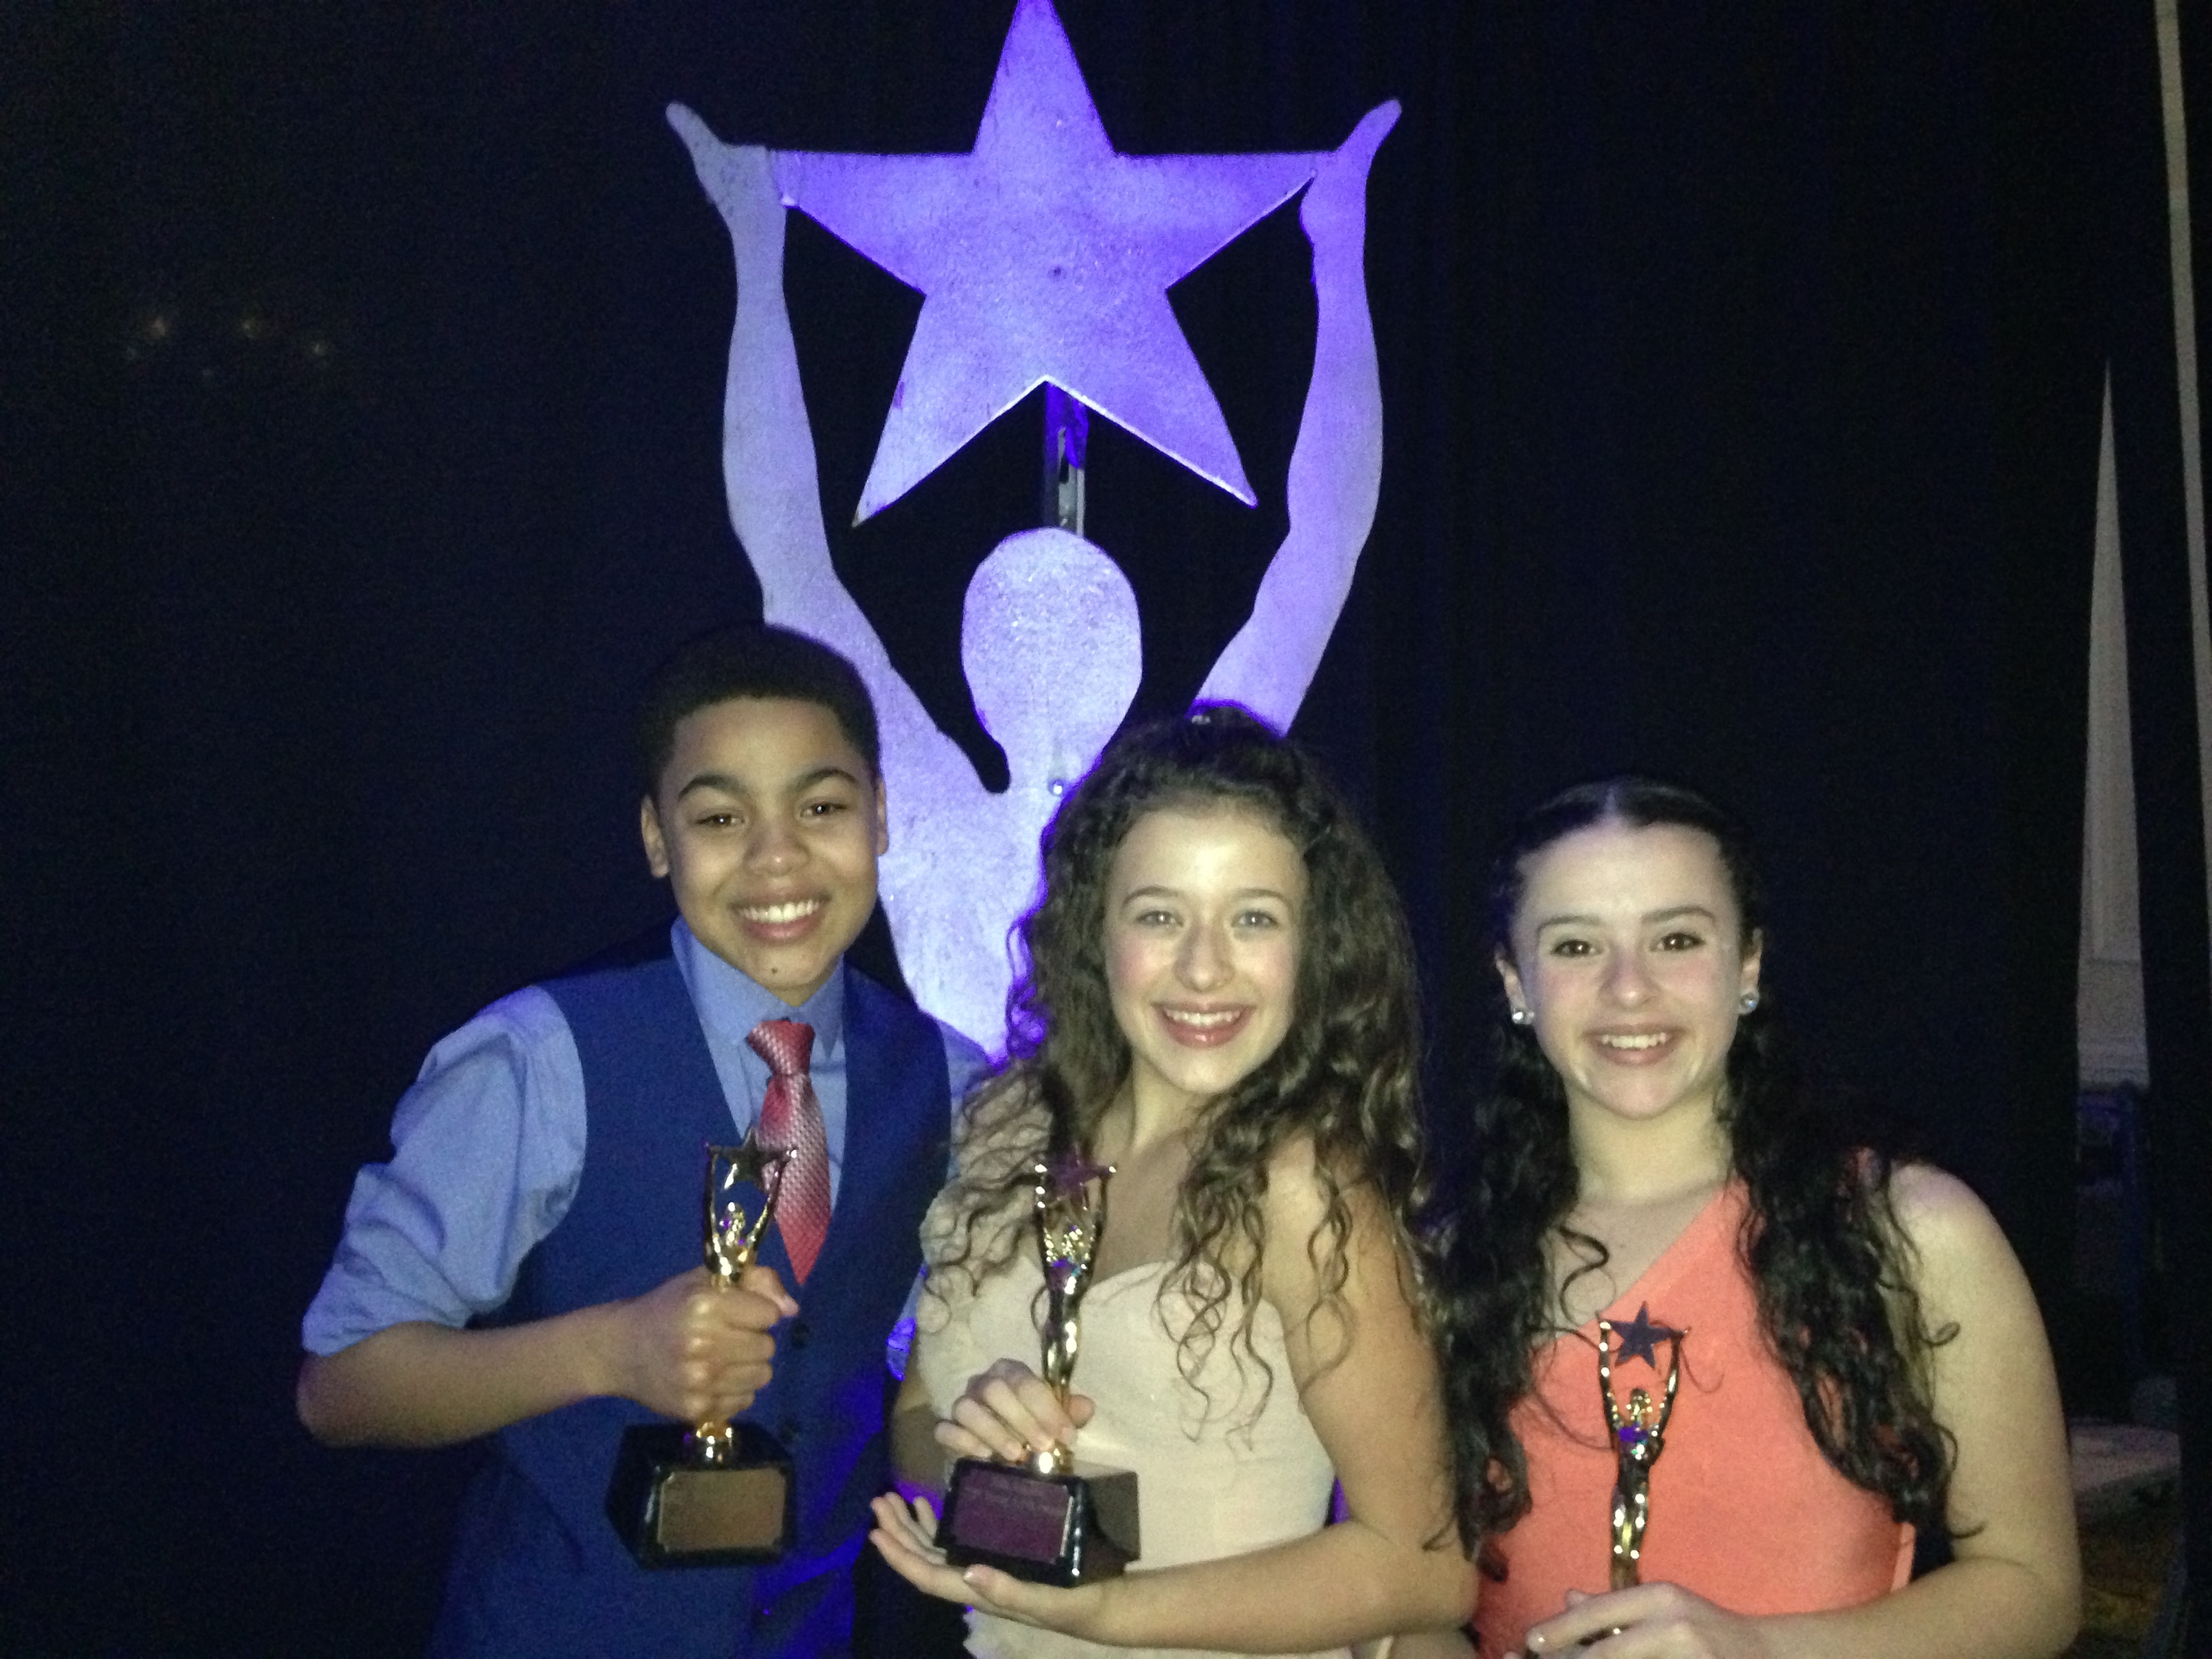 Way to go, 2015 OUTSTANDING ENSEMBLE FOR A TV SHOW!!! Great to work with Addison Holley and Adrianna Di liello.